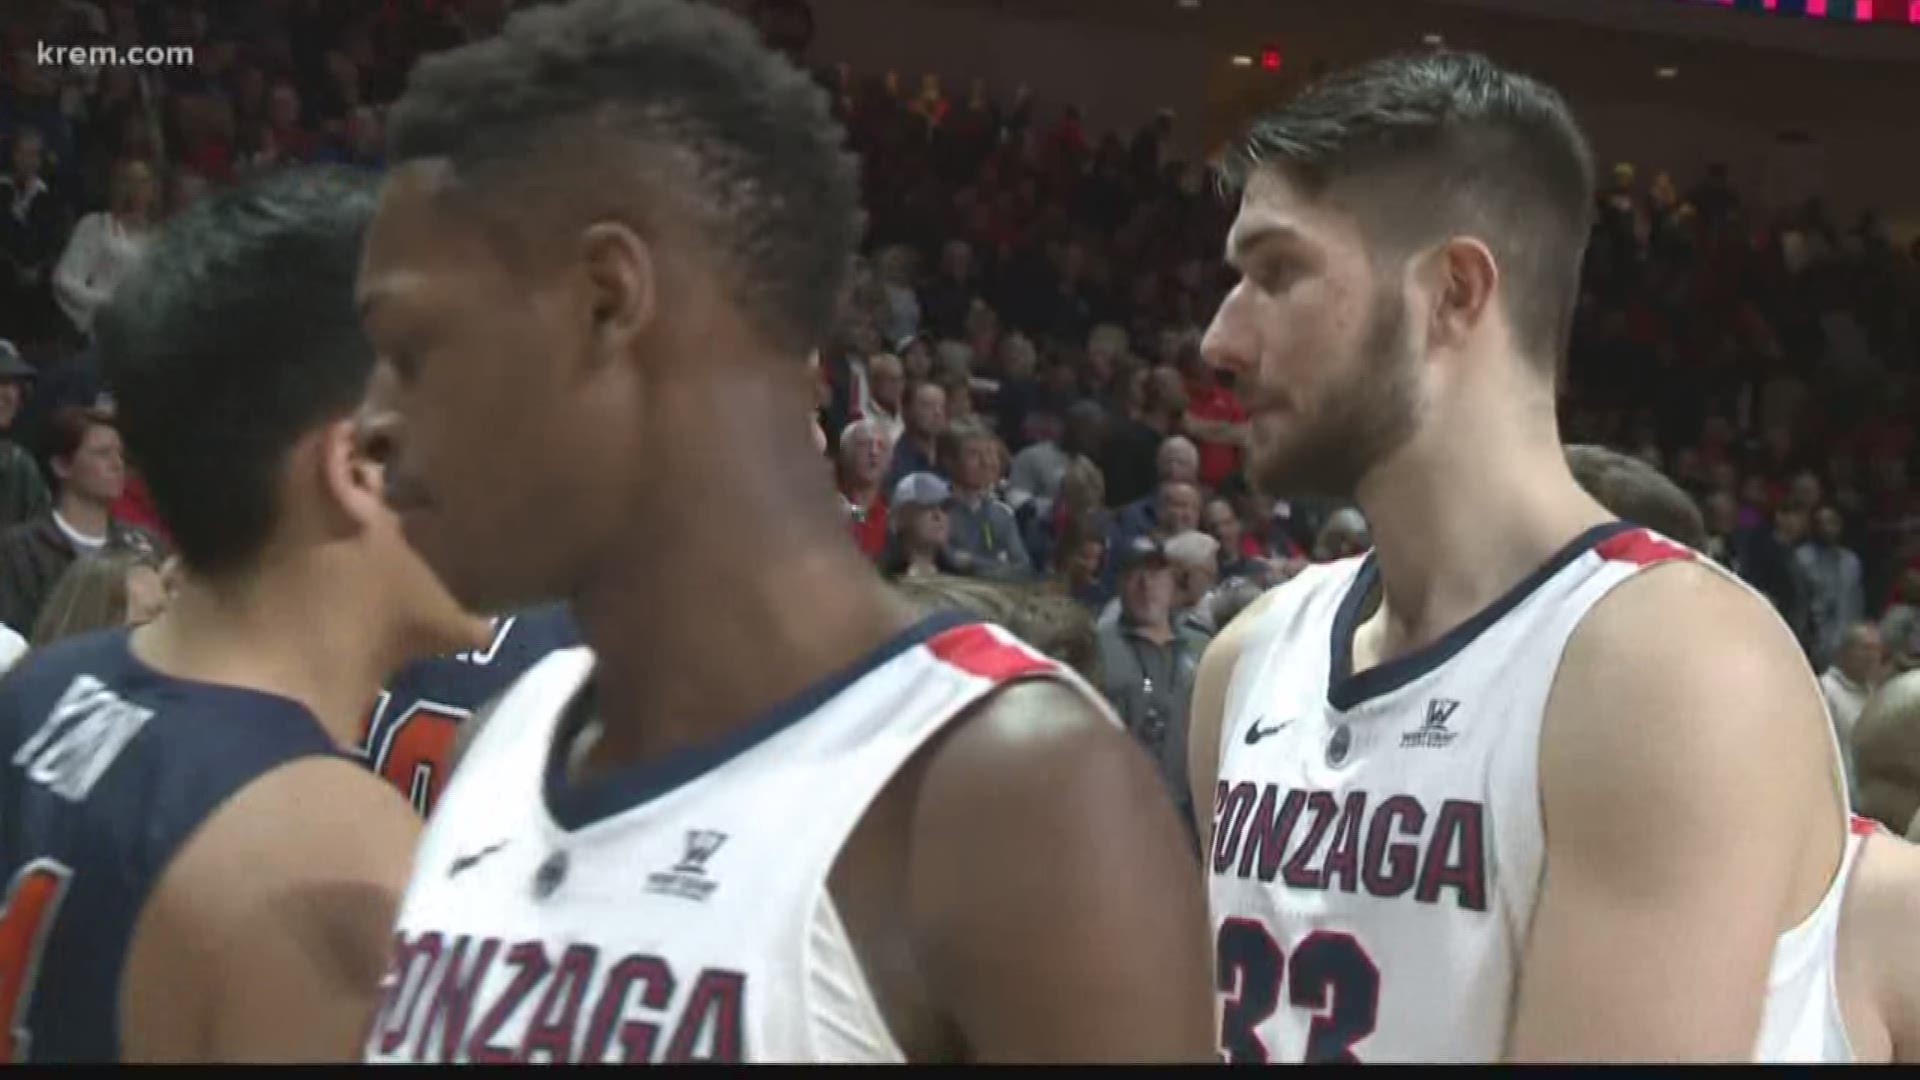 It was a big day for Gonzaga basketball in the WCC tournament. The men's team dominated the court against Pepperdine, while the women's team showed their strength in a double-overtime win.